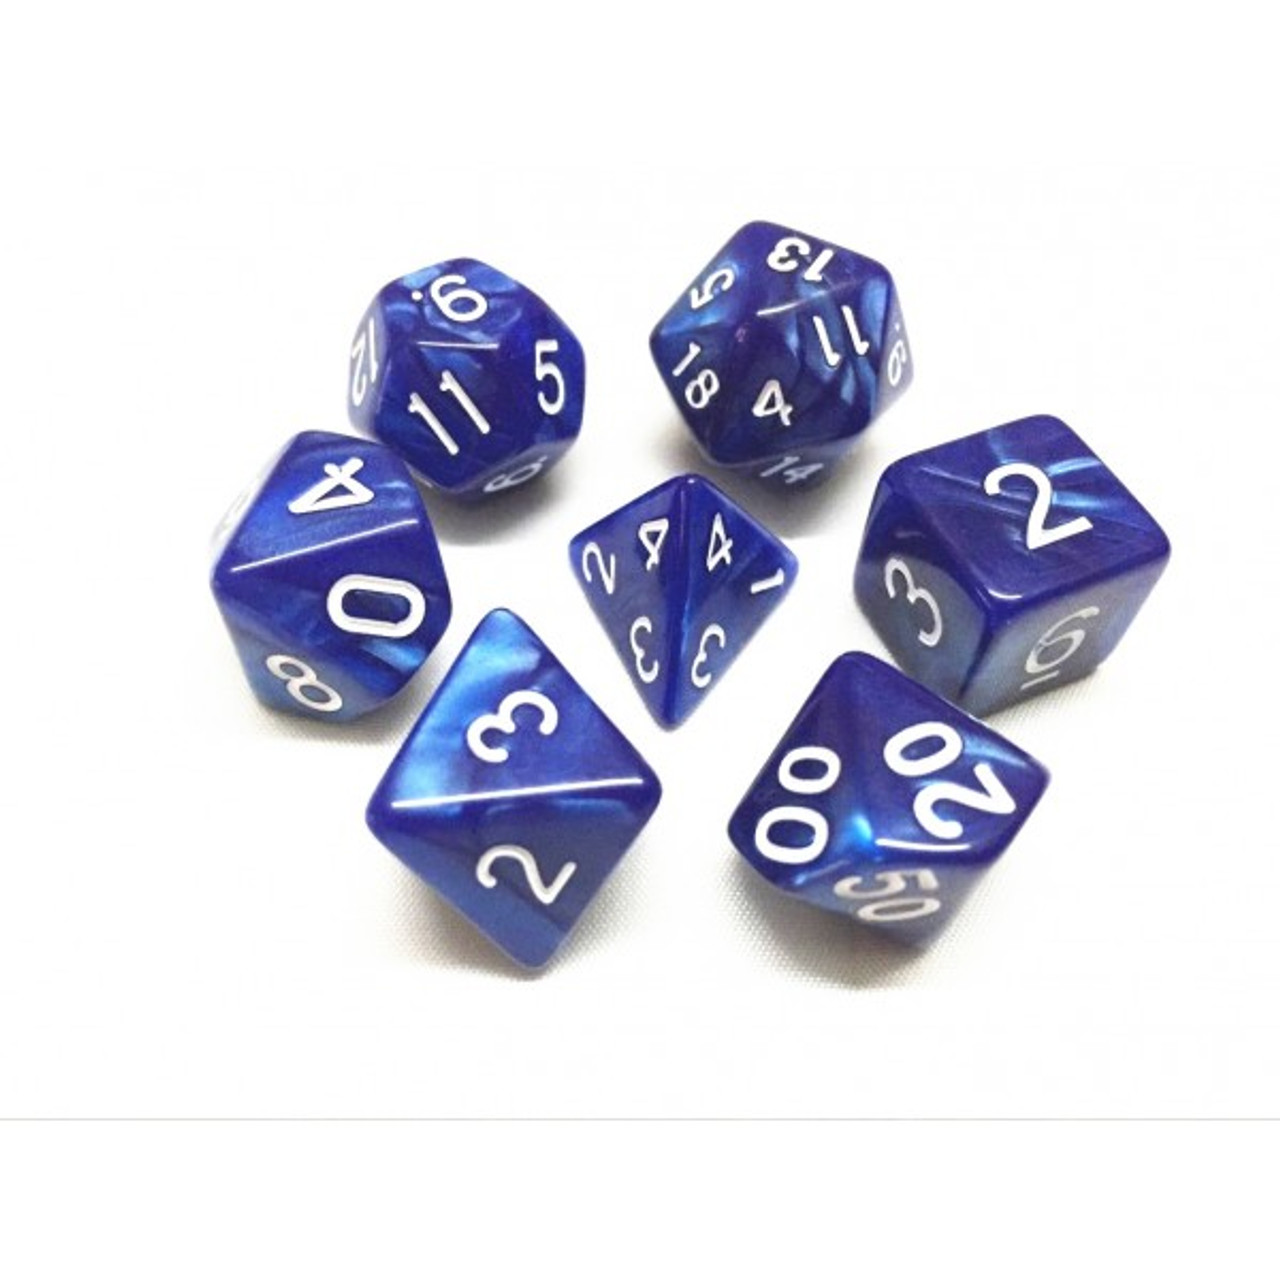 White Pearl Dice Polyhedral Set 